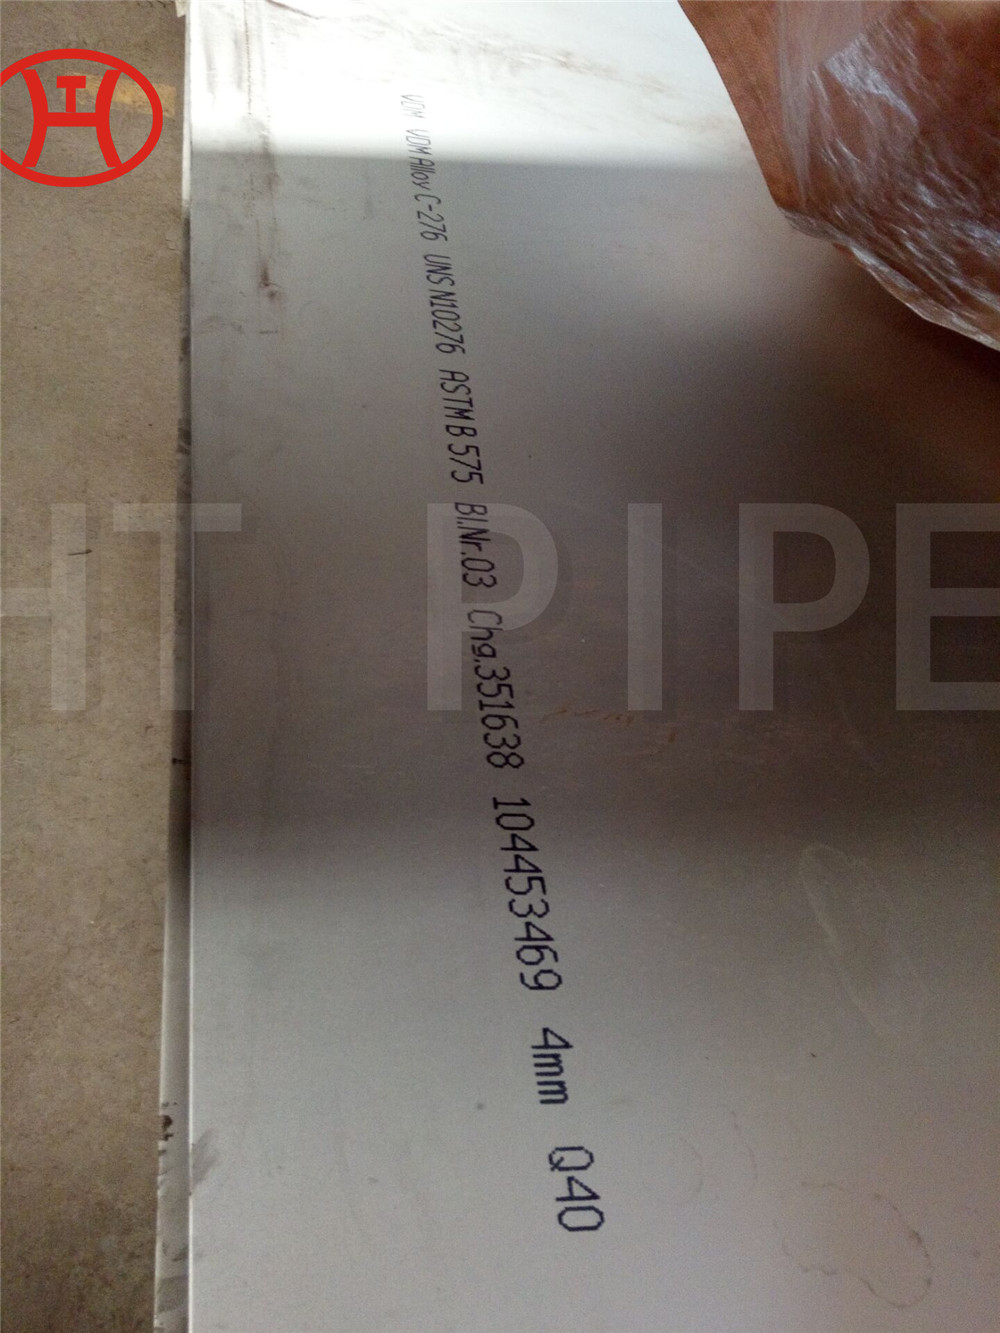 Alloy C276 N10276 ASTM B575 Thickness 4mm Steel Plate